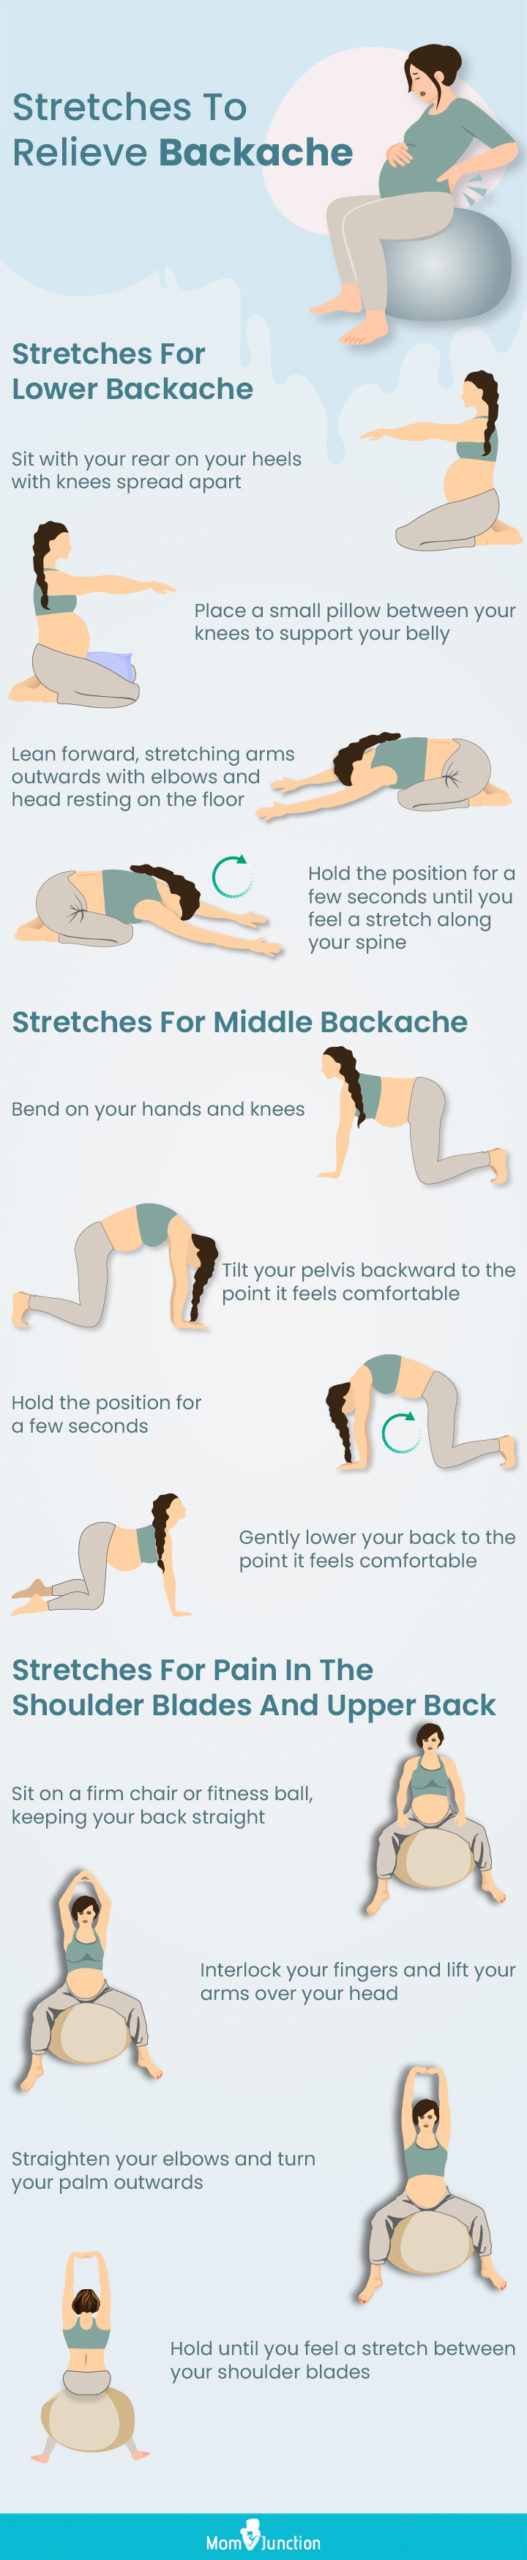 stretches to relieve backache [infographic]